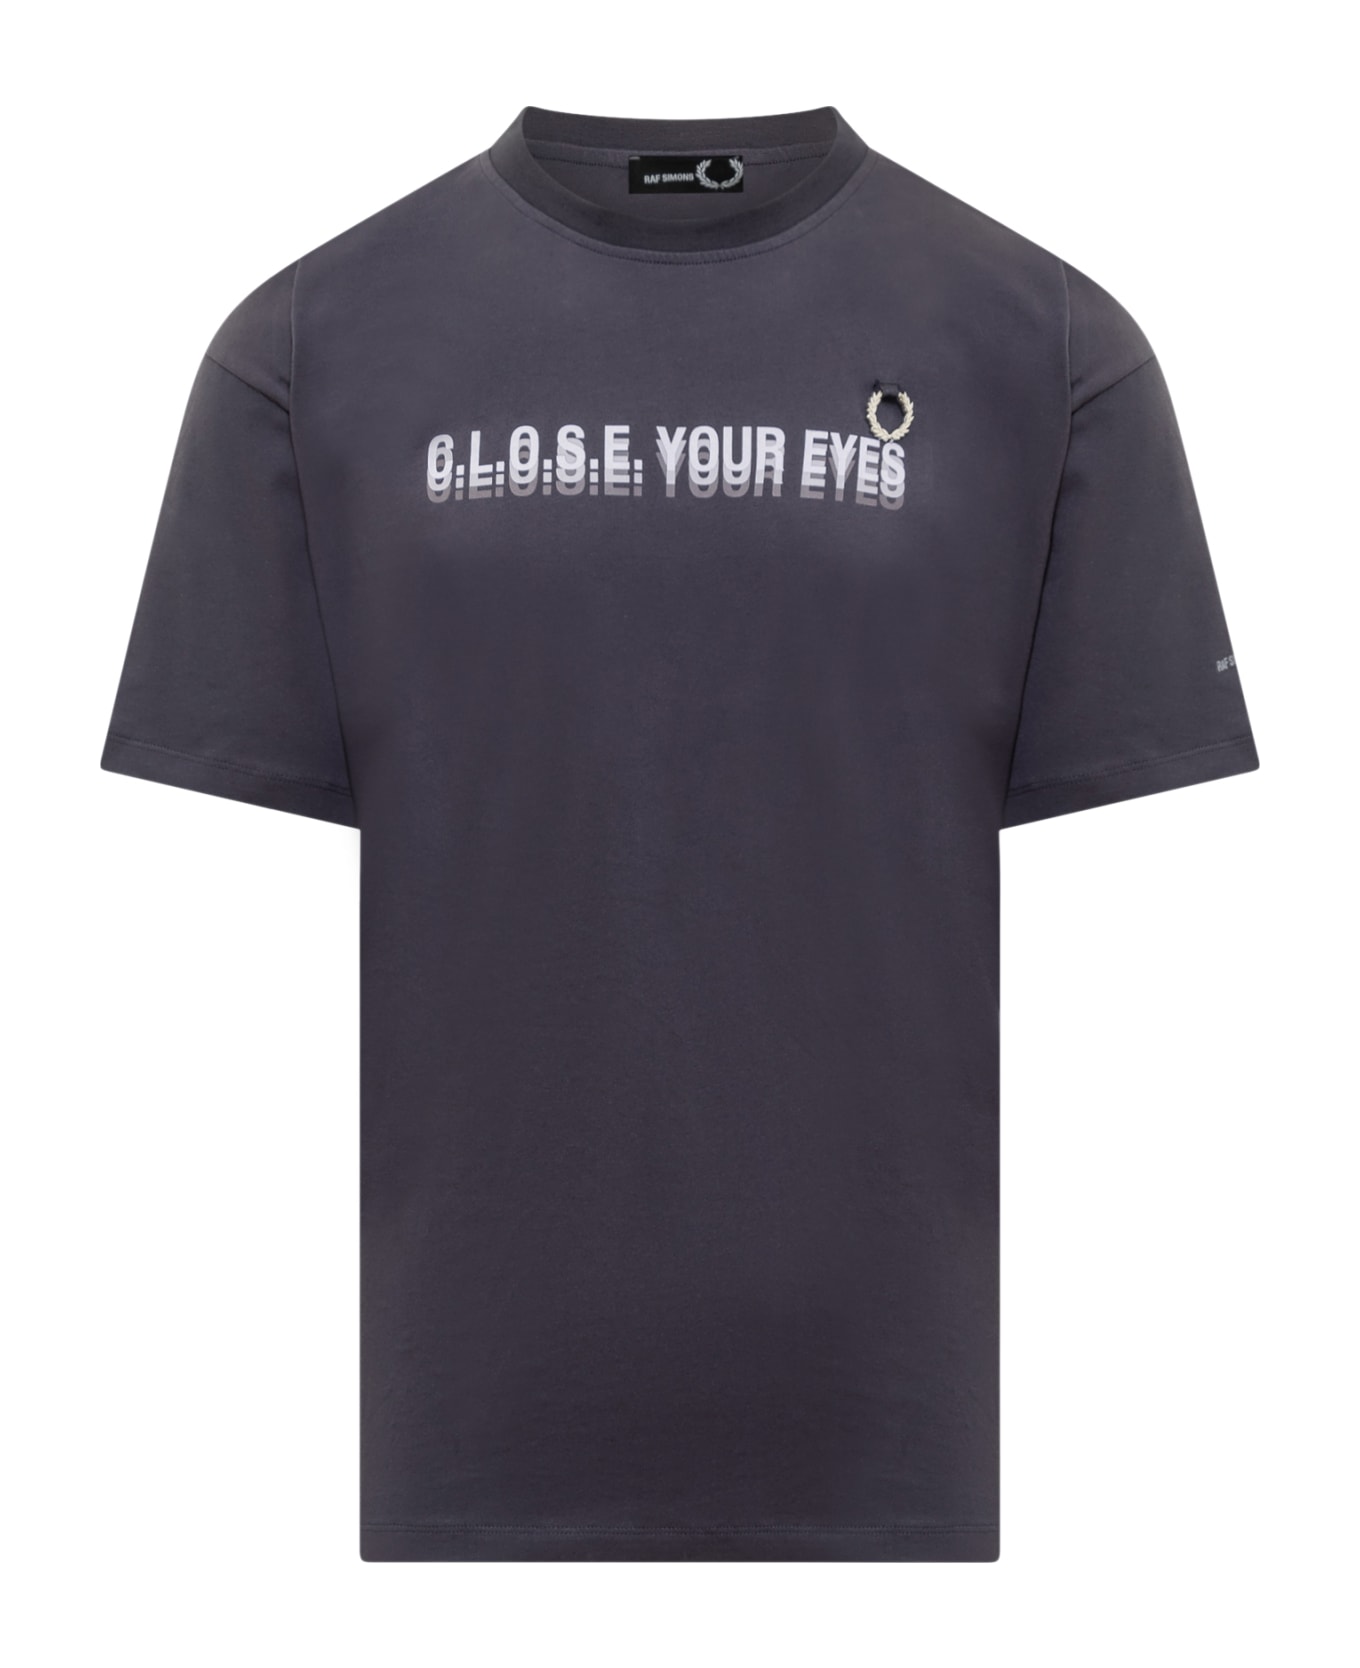 Fred Perry by Raf Simons Fred Perry X Raf Simons T-shirt With Print - NAVY BLUE